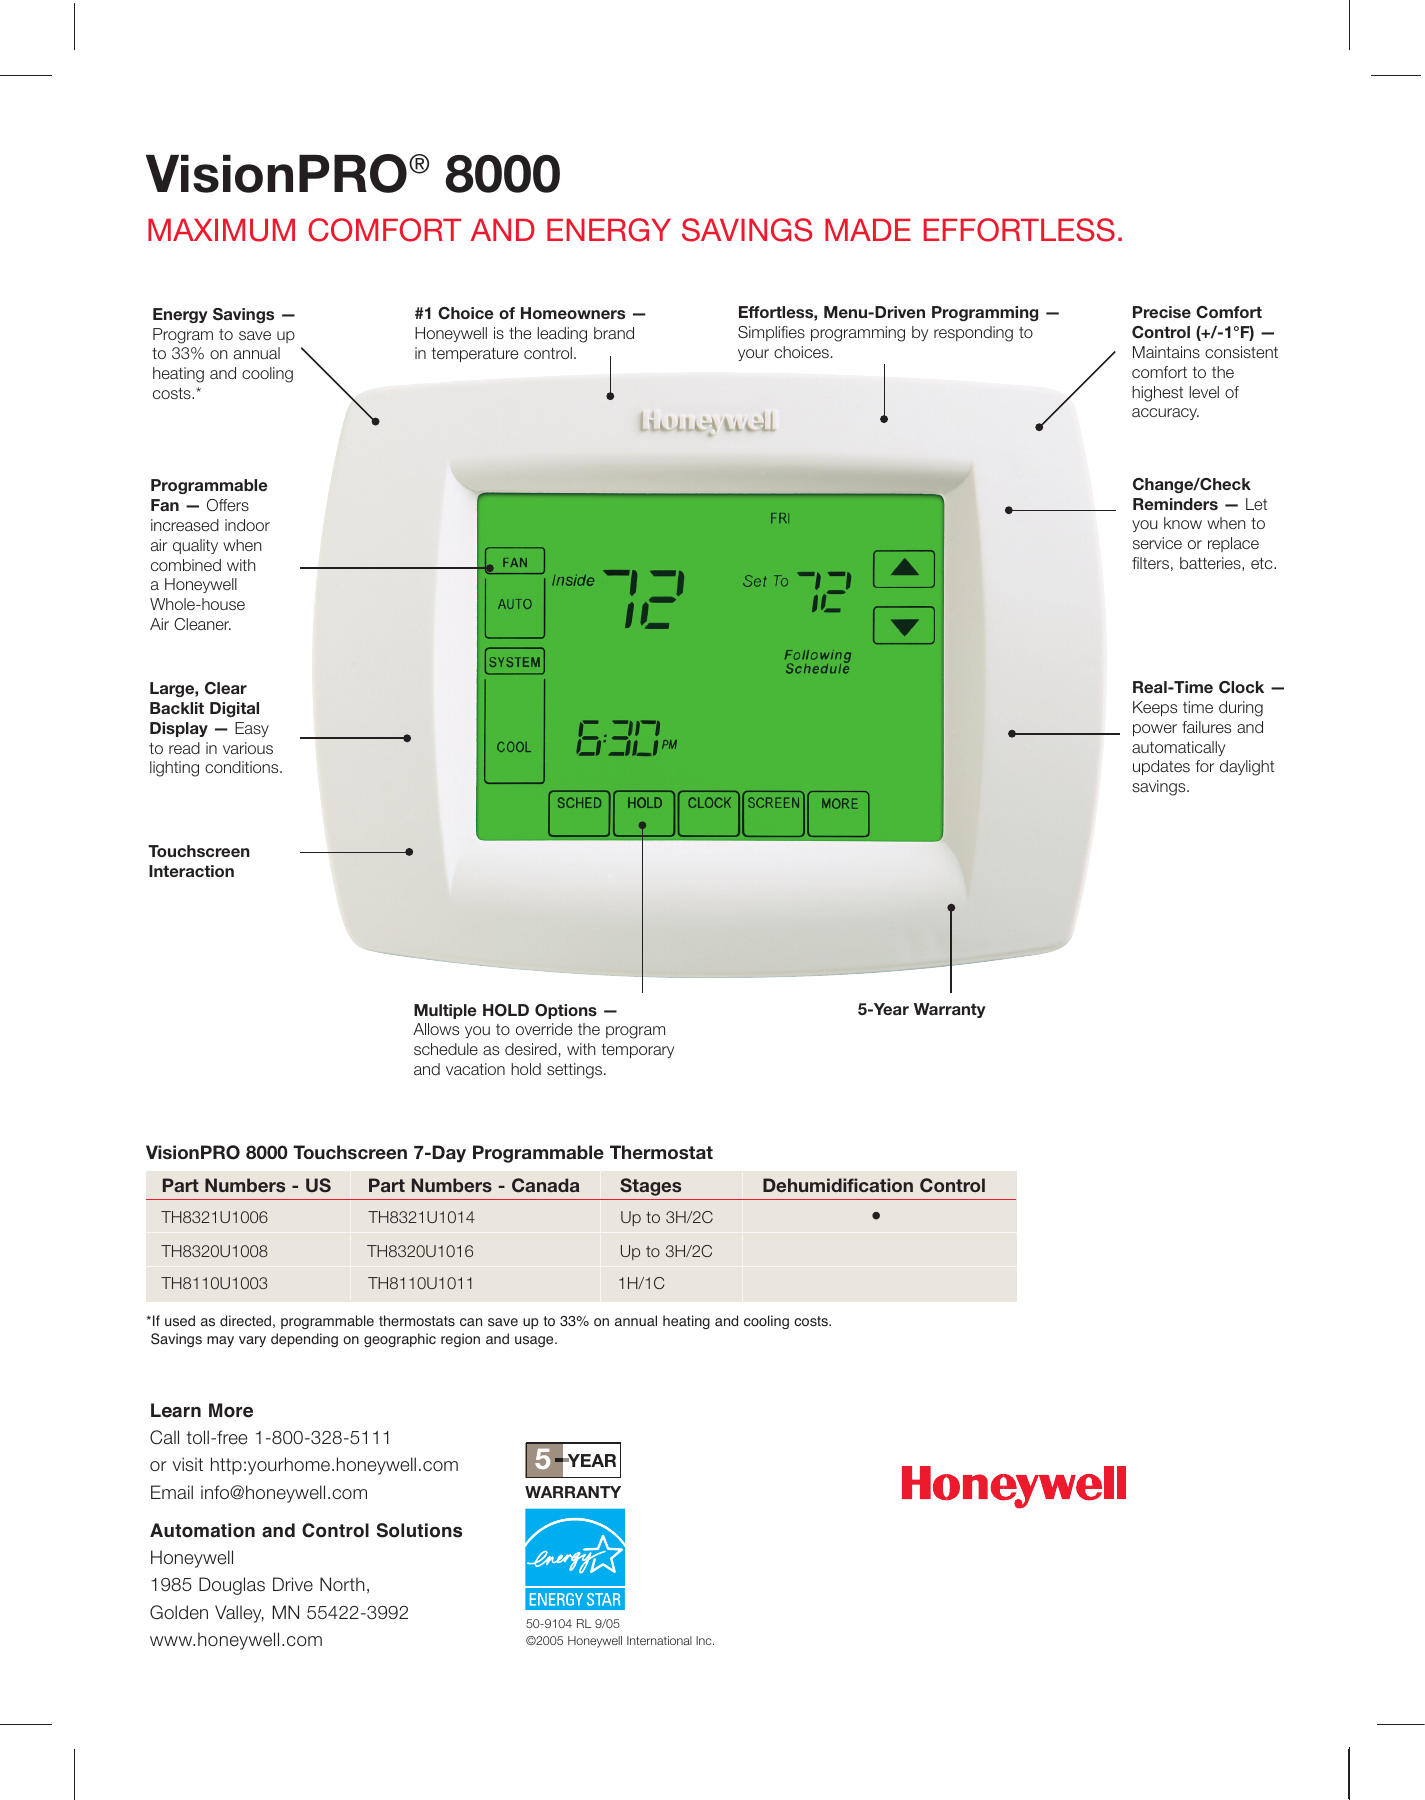 Page 2 of 2 - Honeywell Honeywell-Visionpro-8000-Users-Manual- 50-9104 - VisionPRO 8000 Touchscreen 7-Day Programmable Thermostat  Honeywell-visionpro-8000-users-manual